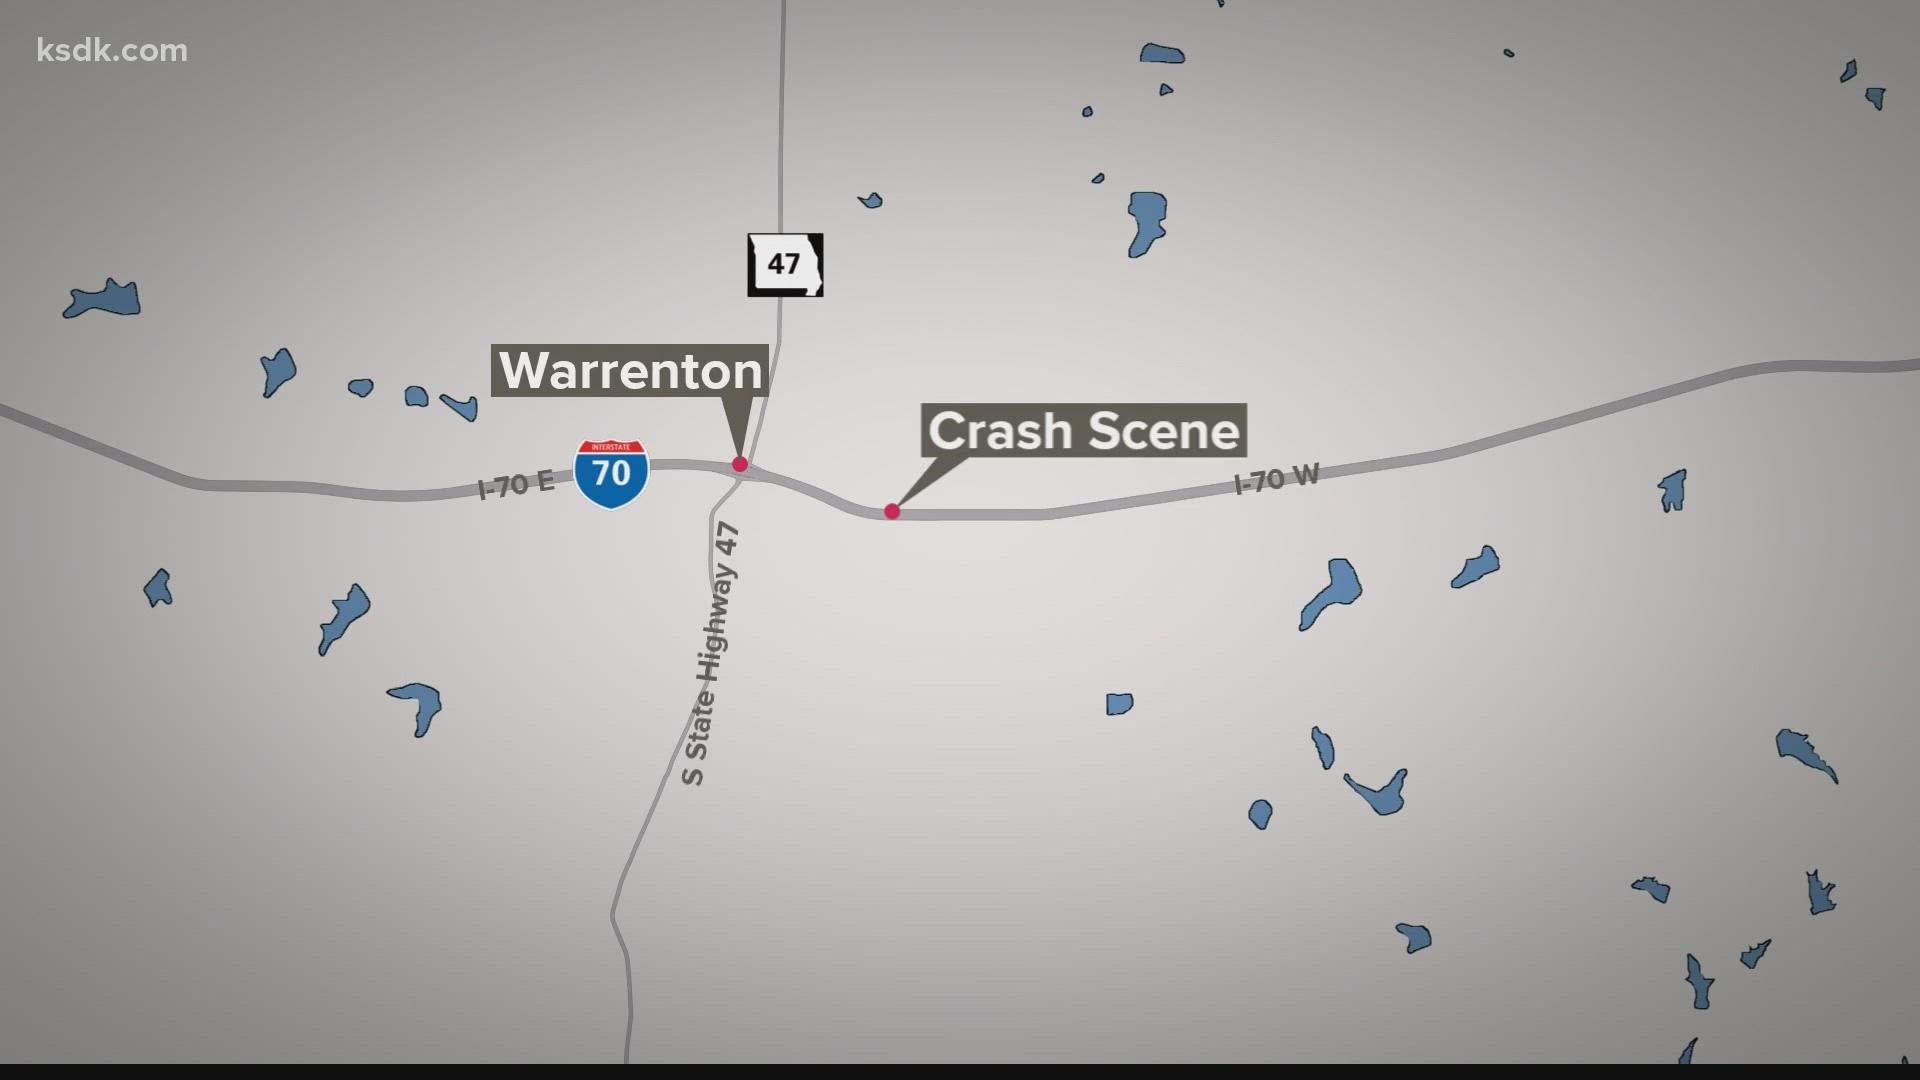 A man was hit and killed while chasing a dog along an interstate in Warren County Thursday night.